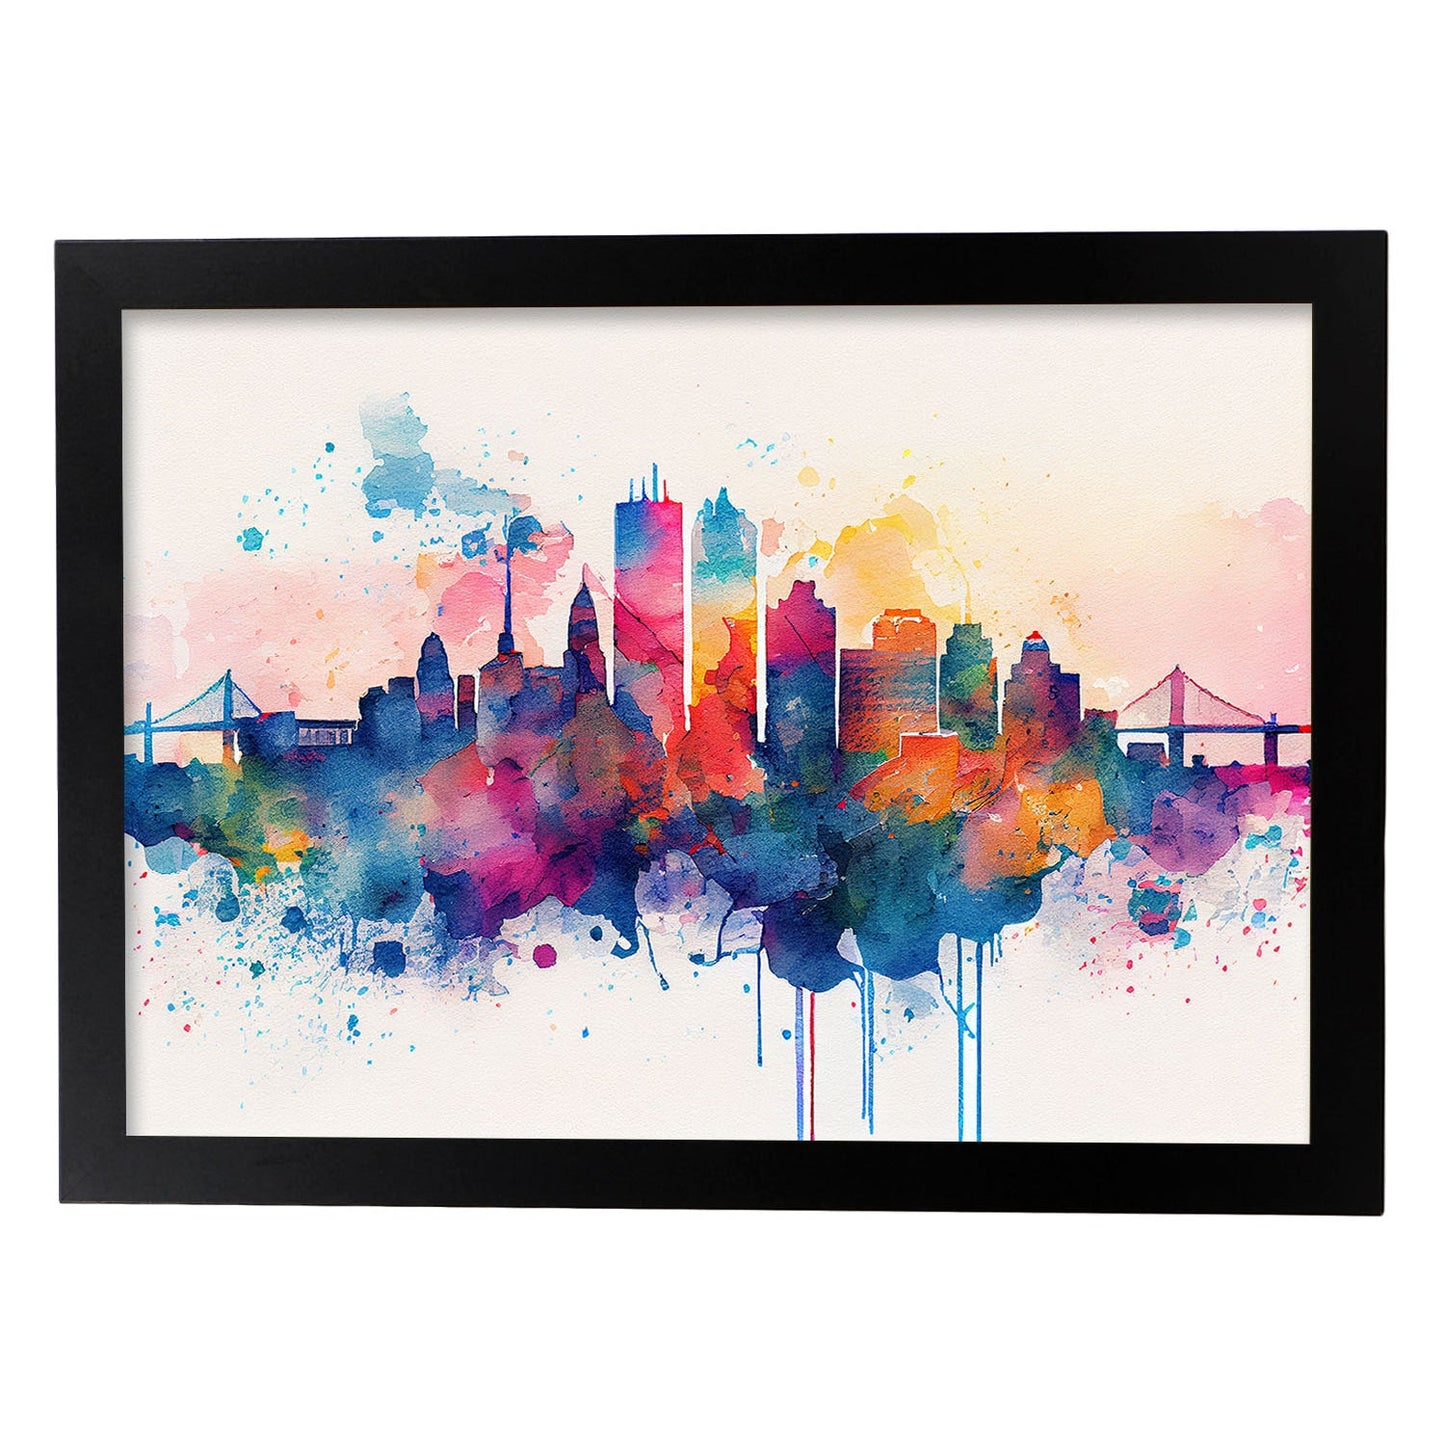 Nacnic watercolor of a skyline of the city of Boston_1. Aesthetic Wall Art Prints for Bedroom or Living Room Design.